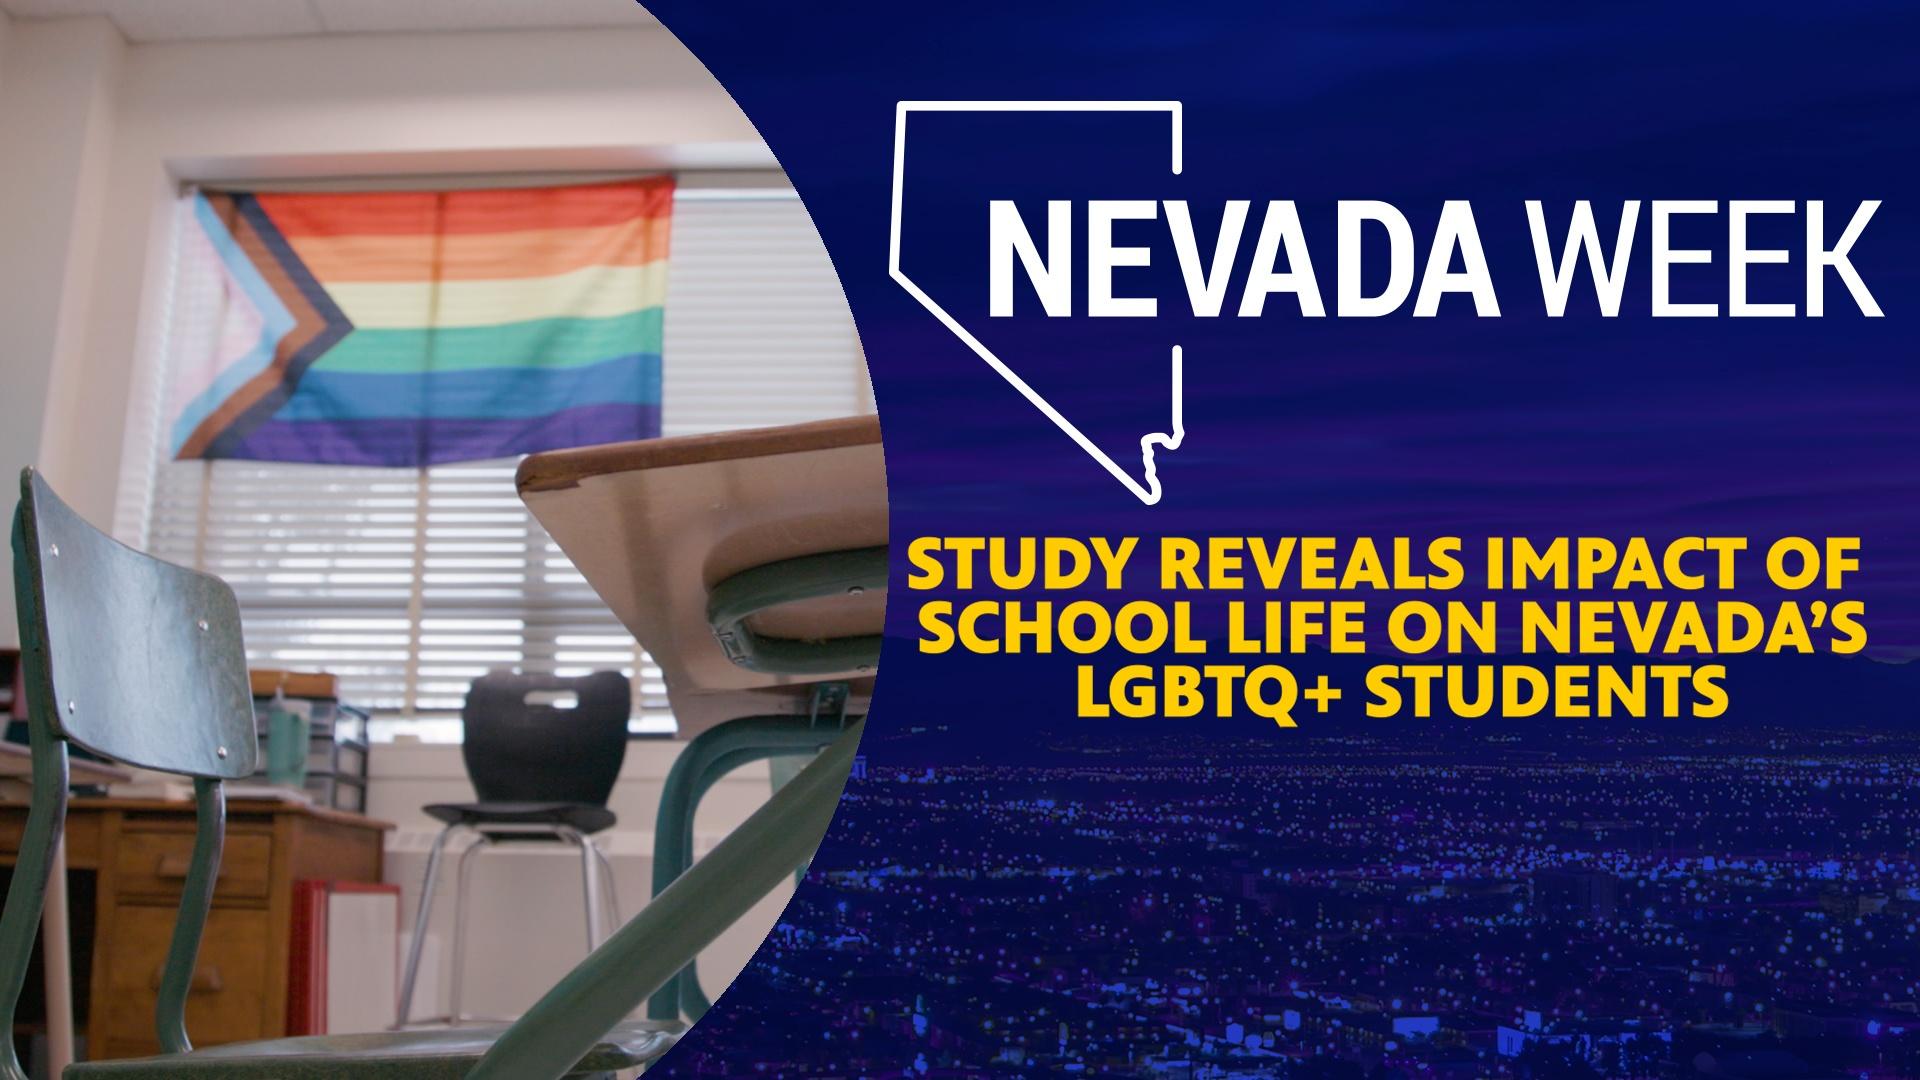 The impact of school life on Nevada’s LGBTQ+ students